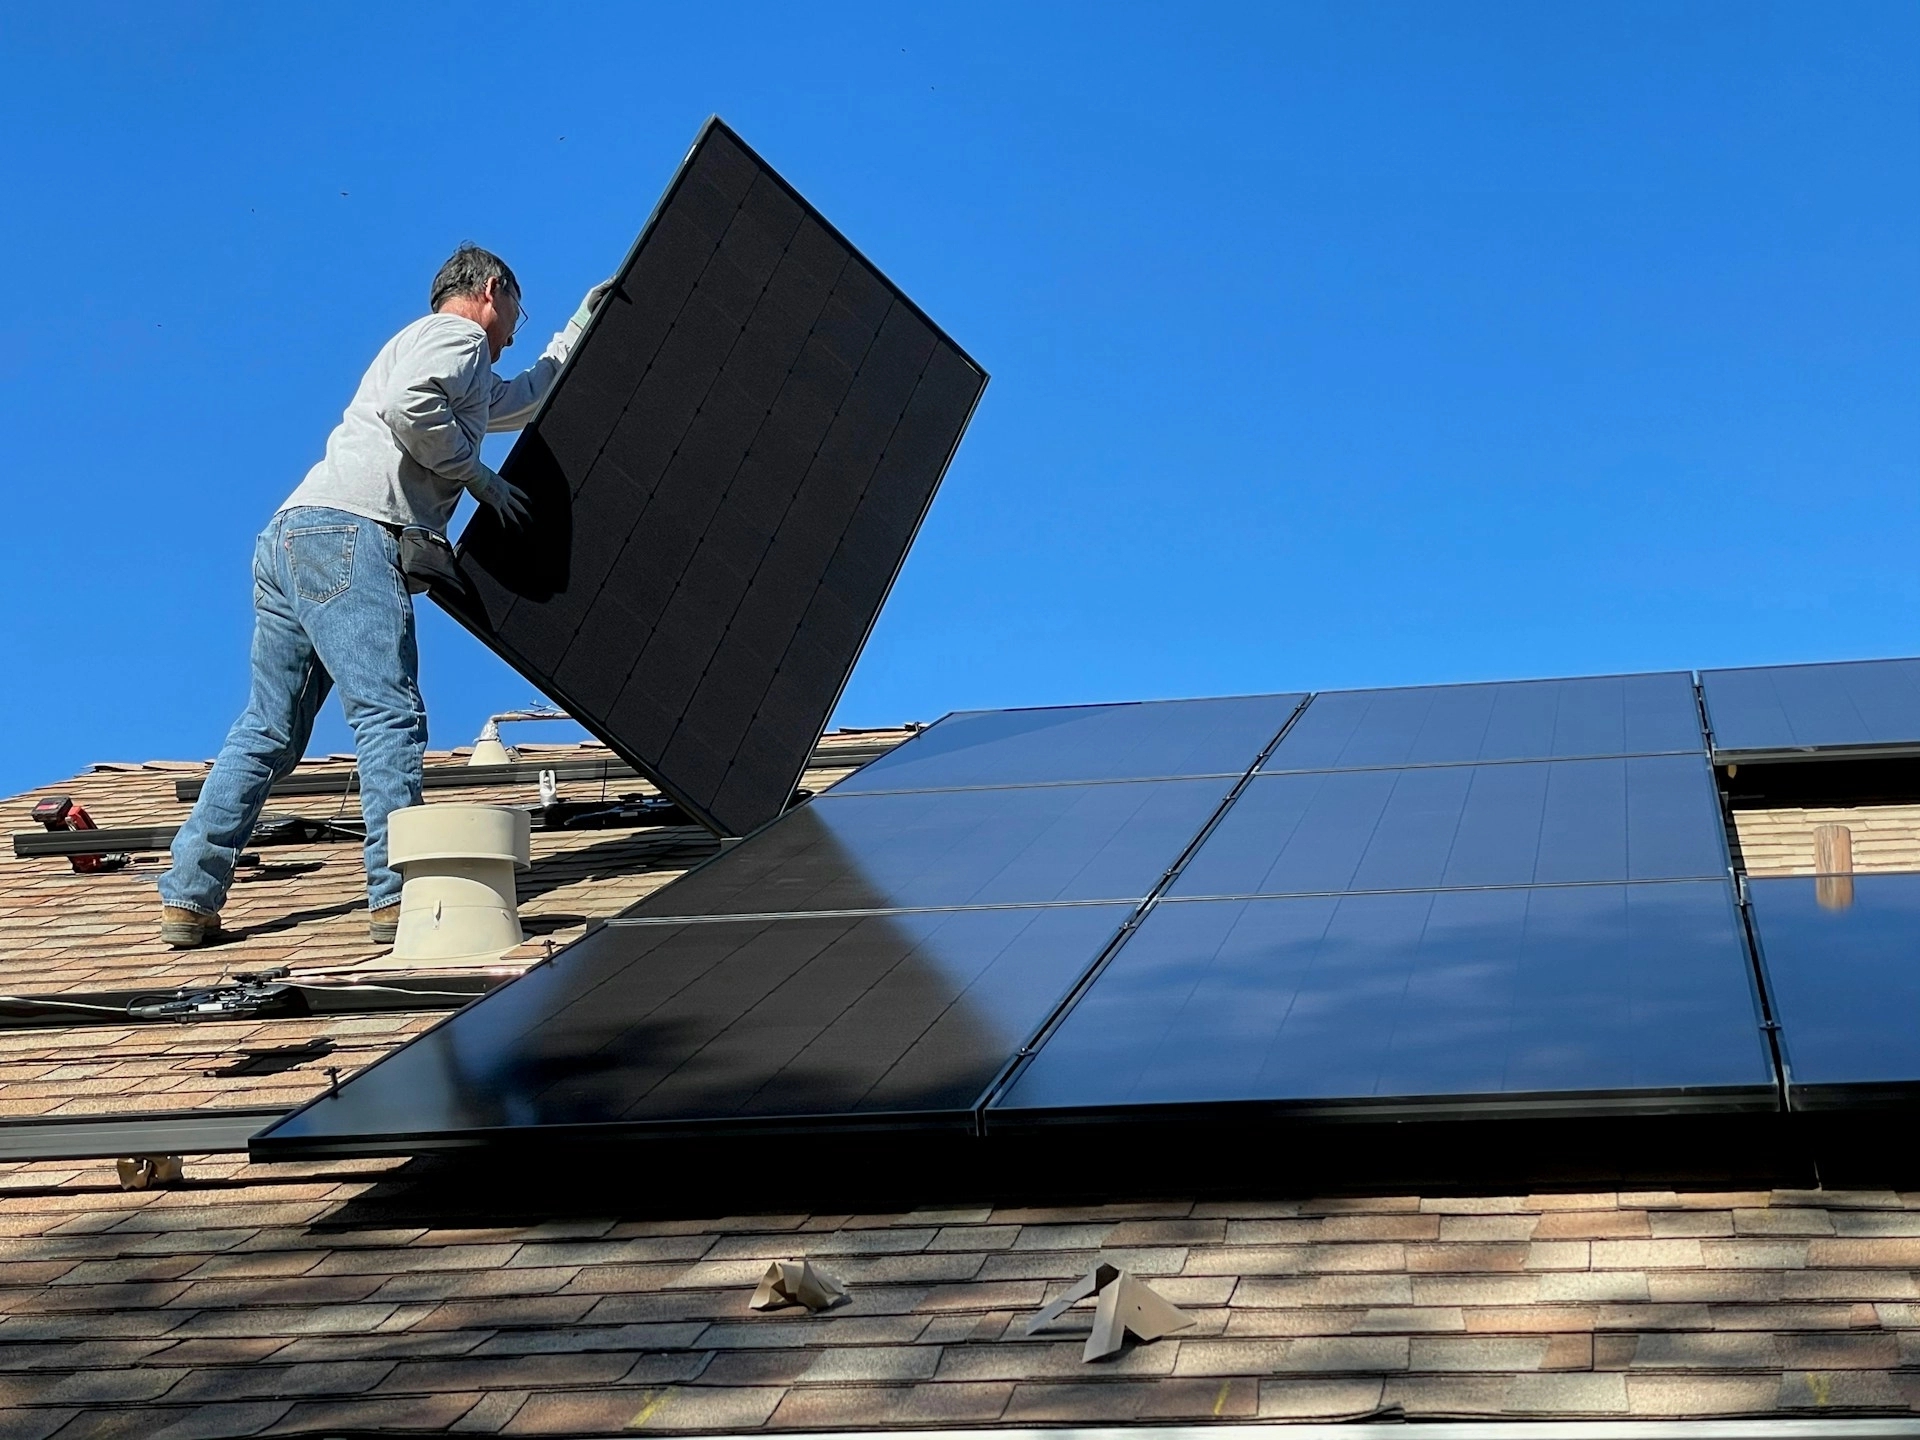 Man fitting a solar panel on roof